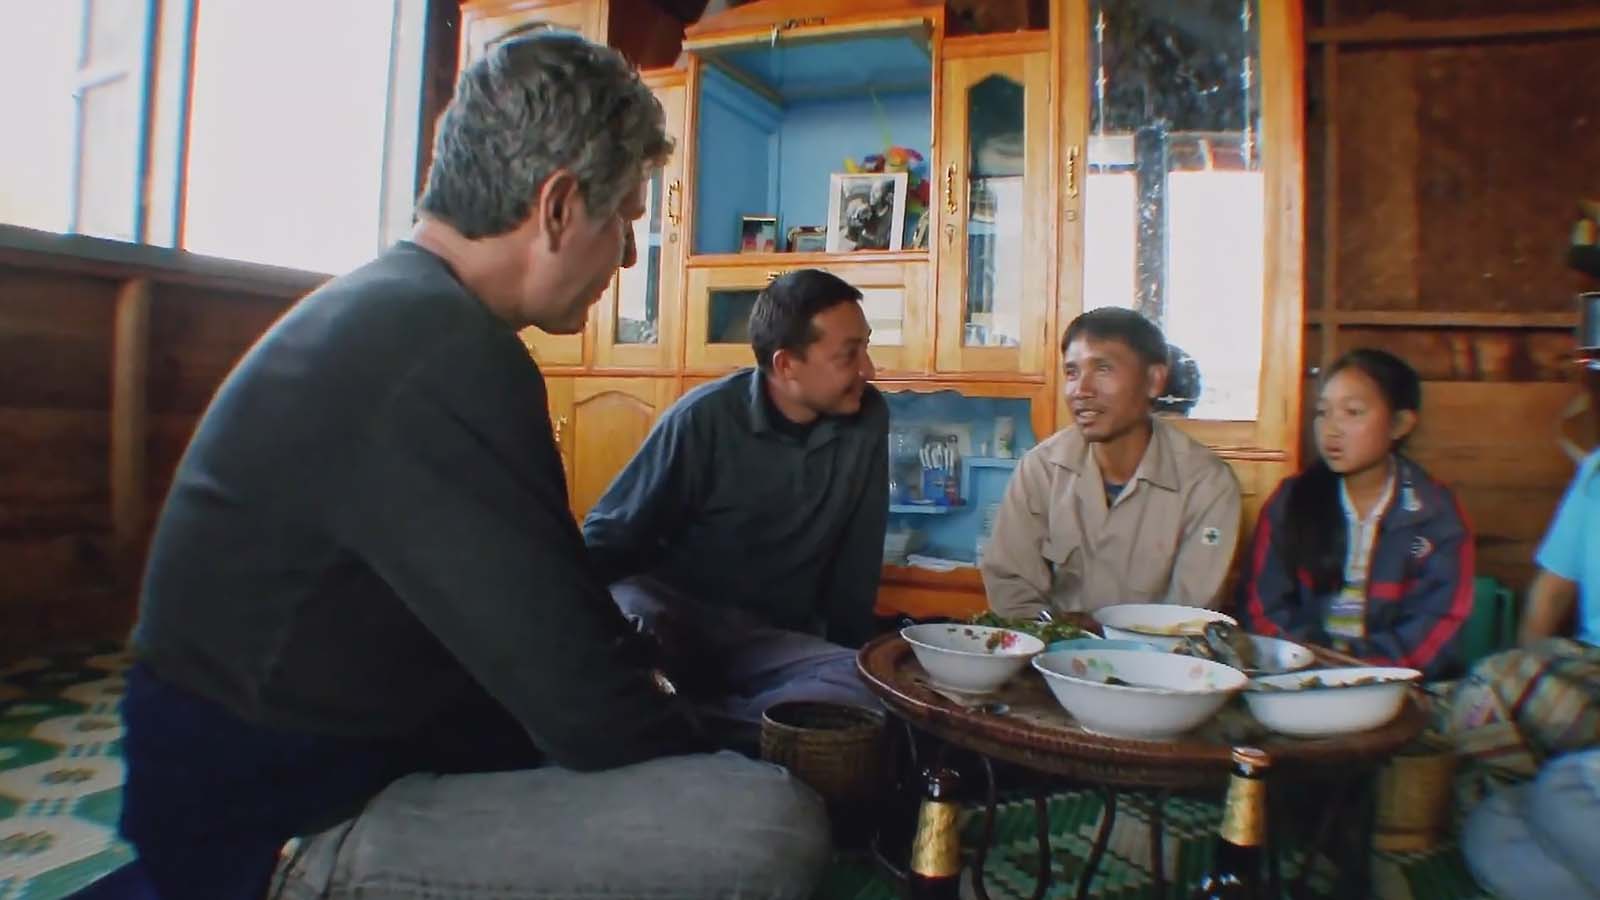 Anthony Bourdain was unafraid to point the camera at difficult topics, like the bombing of Laos. Image © Focus Features